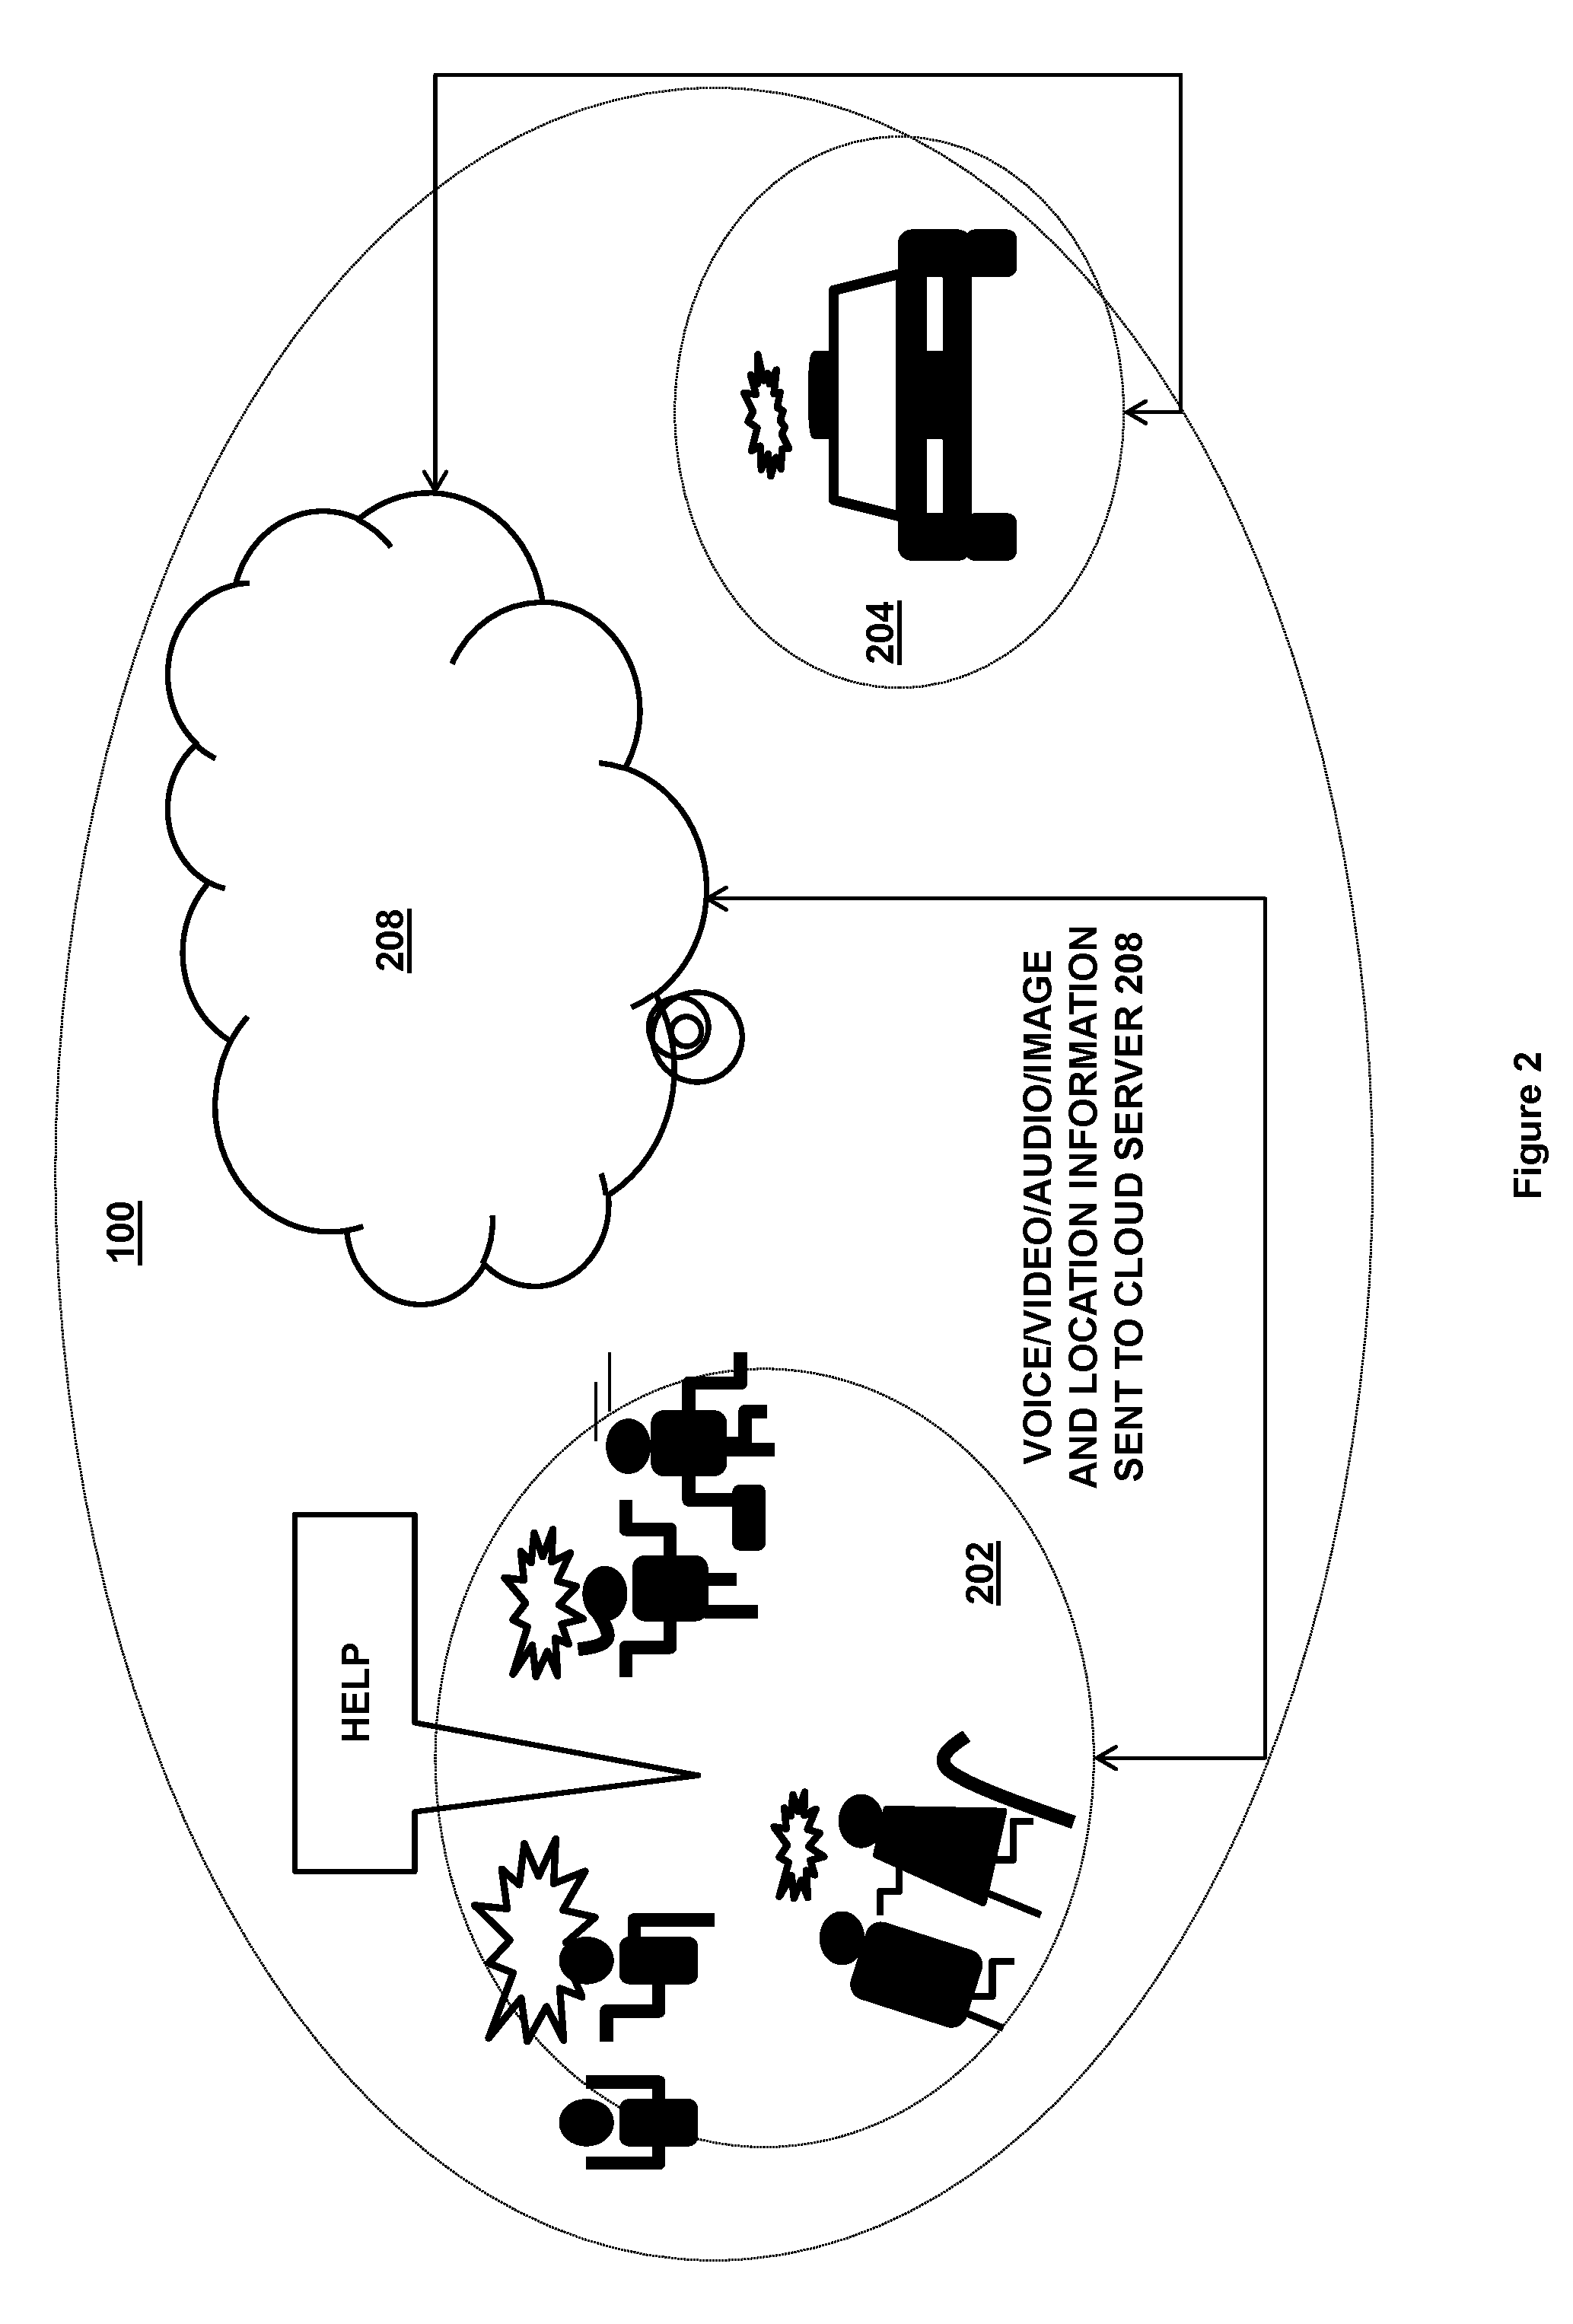 Method and system for managing public safety in at least one of unknown, unexpected, unwanted and untimely situations via offering indemnity in conjunction with wearable computing and communications devices